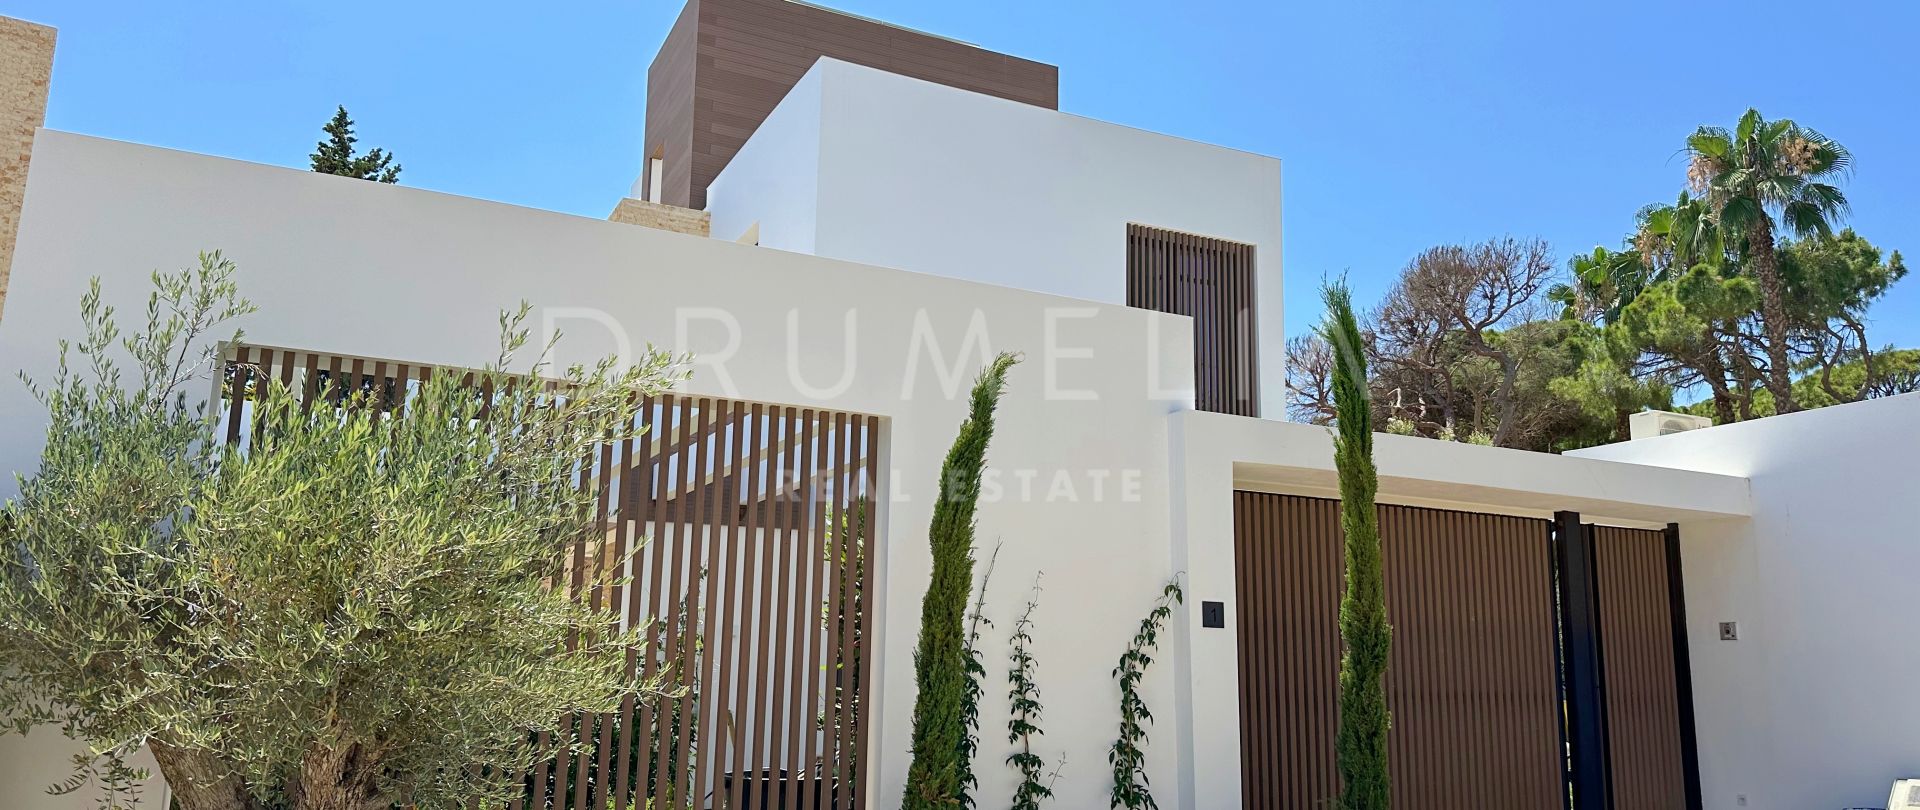 New sophisticated modern house with sea views and luxurious amenities, Marbella’s Golden Mile